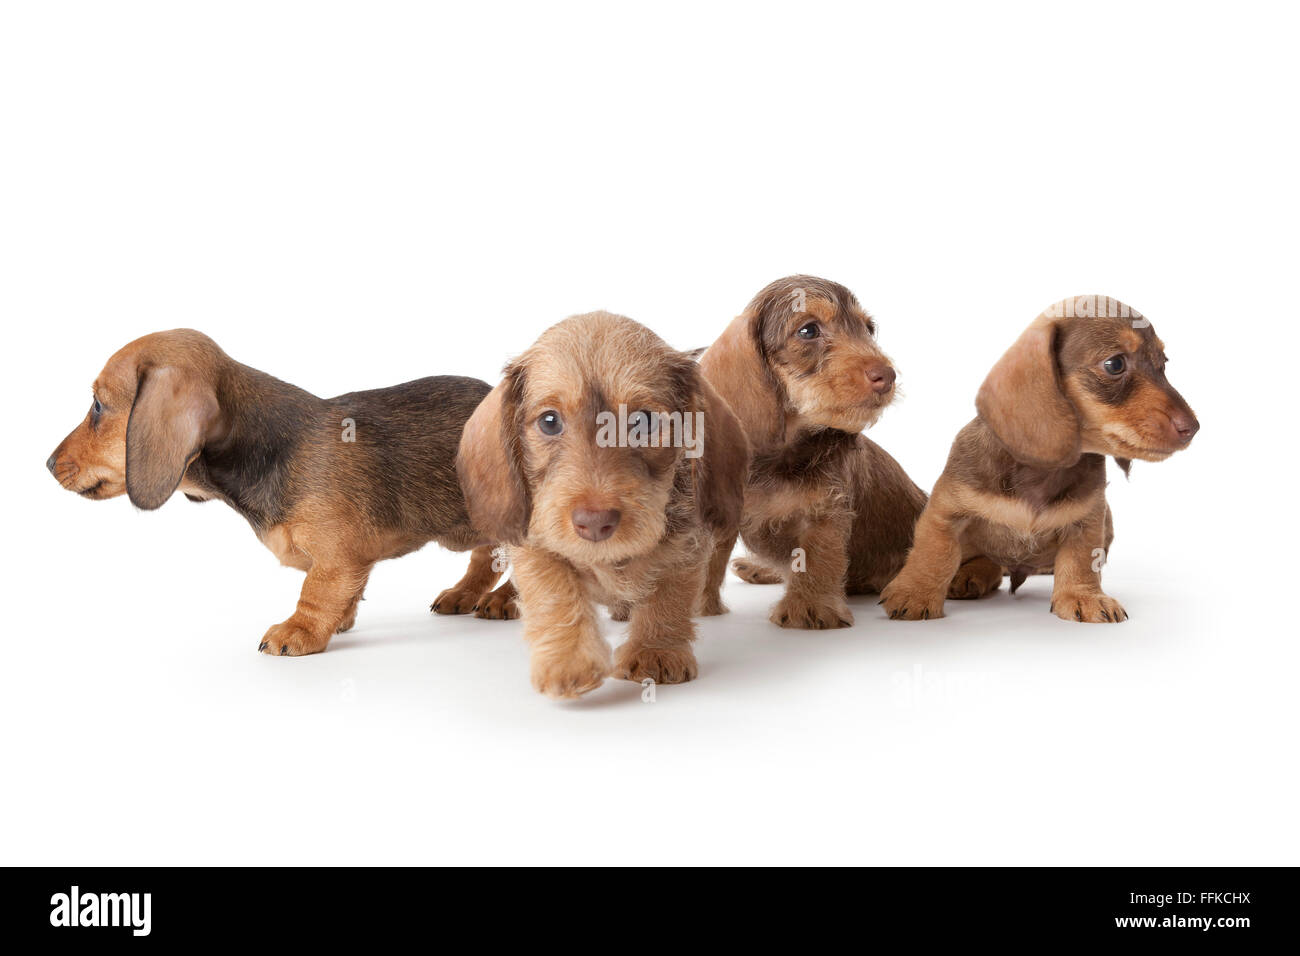 Four wire-haired dachshund puppies on white background Stock Photo